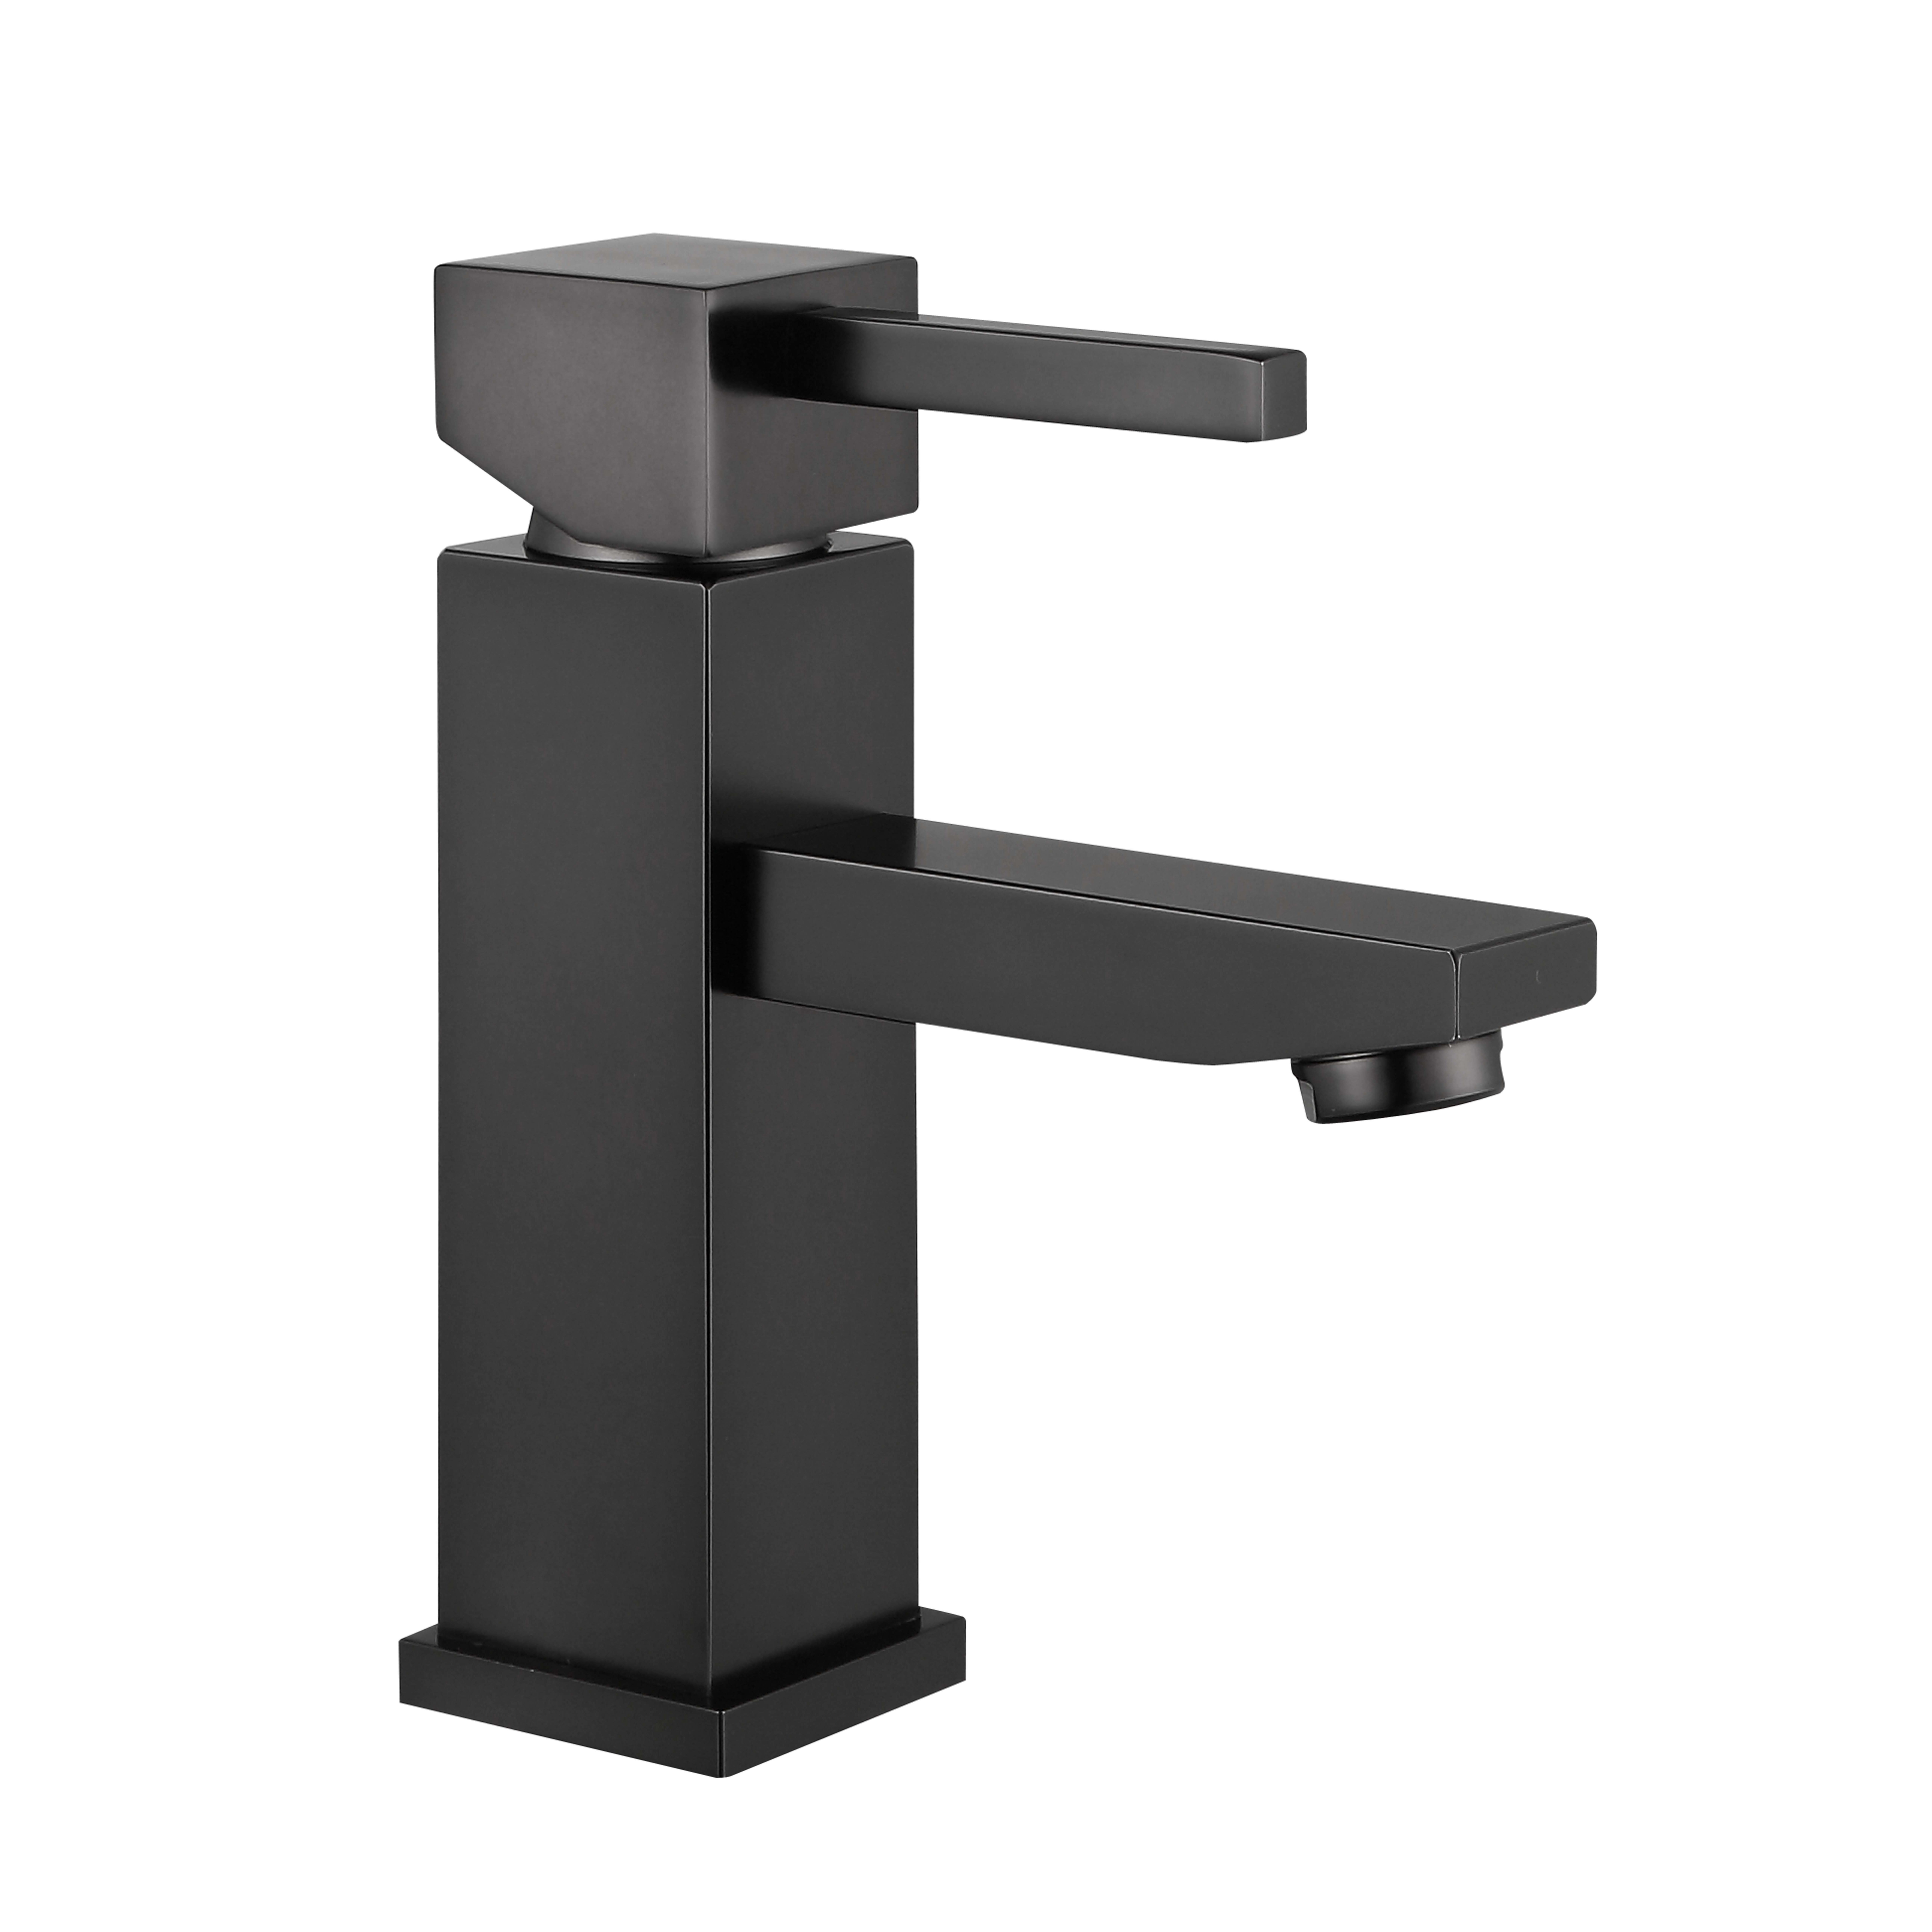 1.9" One Hole Single Faucet with 5 Finish Options